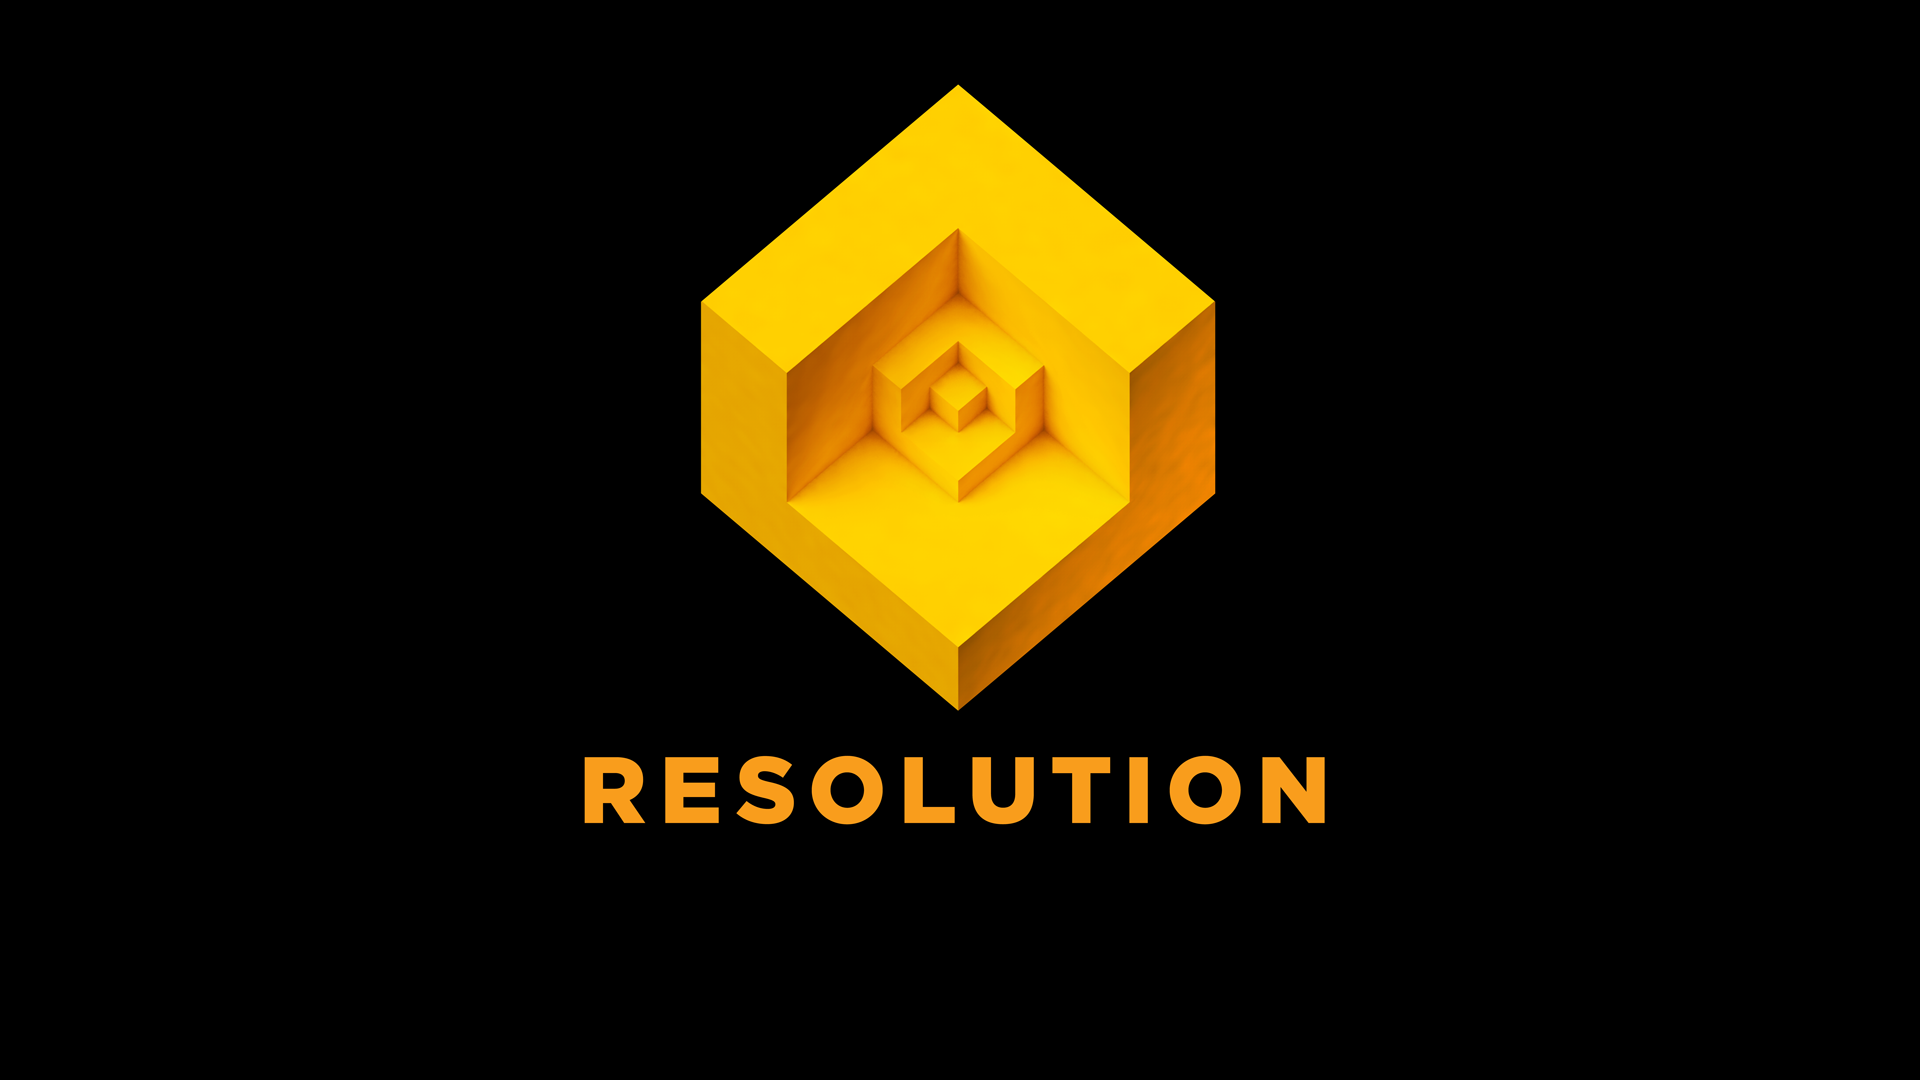 Resolution Games to Host VR Games Showcase December 15th, Promises “major game announcements” – Road to VR